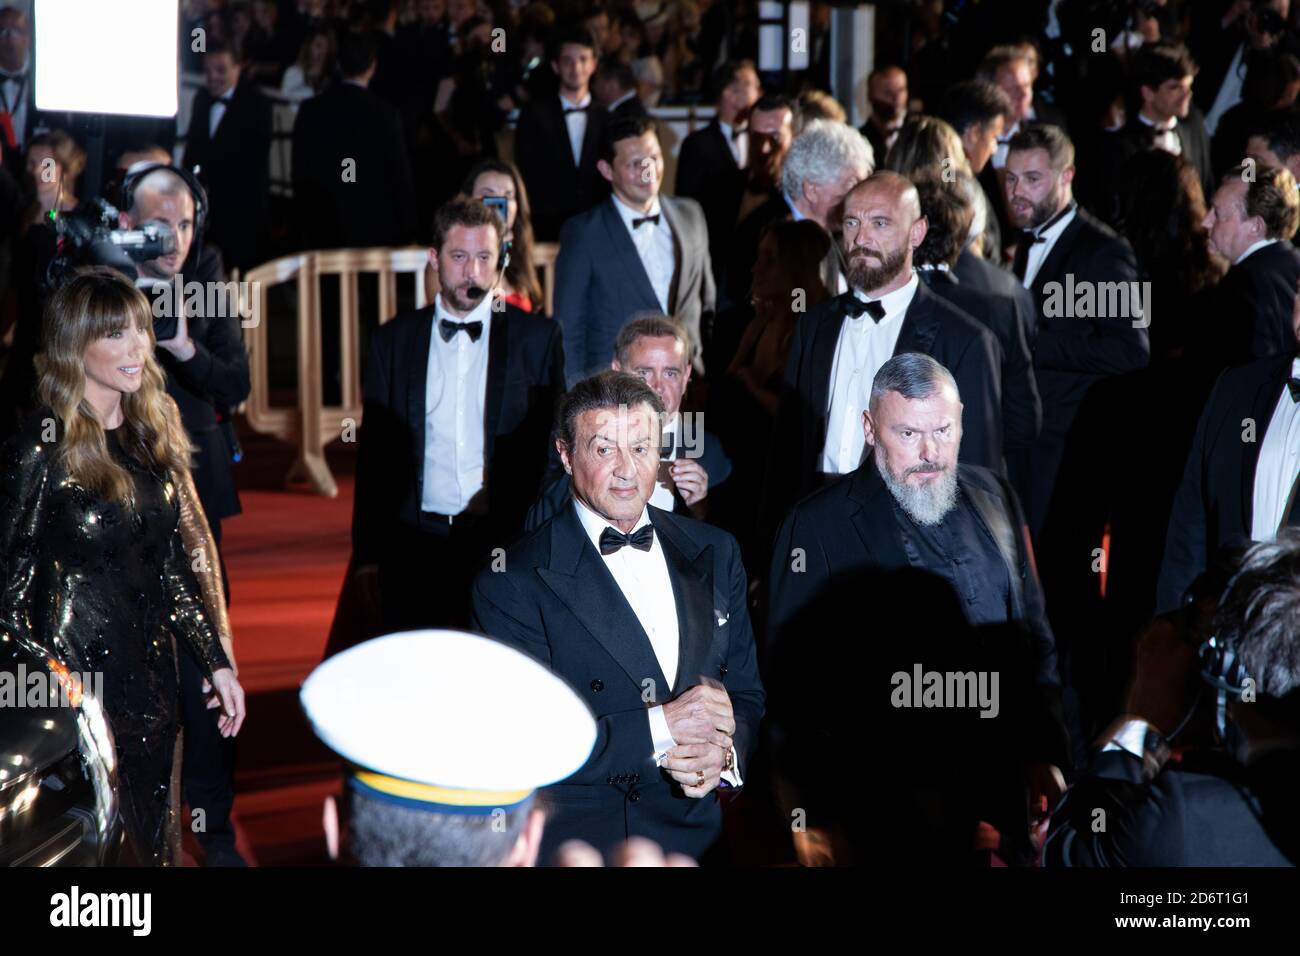 CANNES, FRANCE - May 25, 2019: Sylvester Stallone arrives at the Cannes Film Festival. Stock Photo